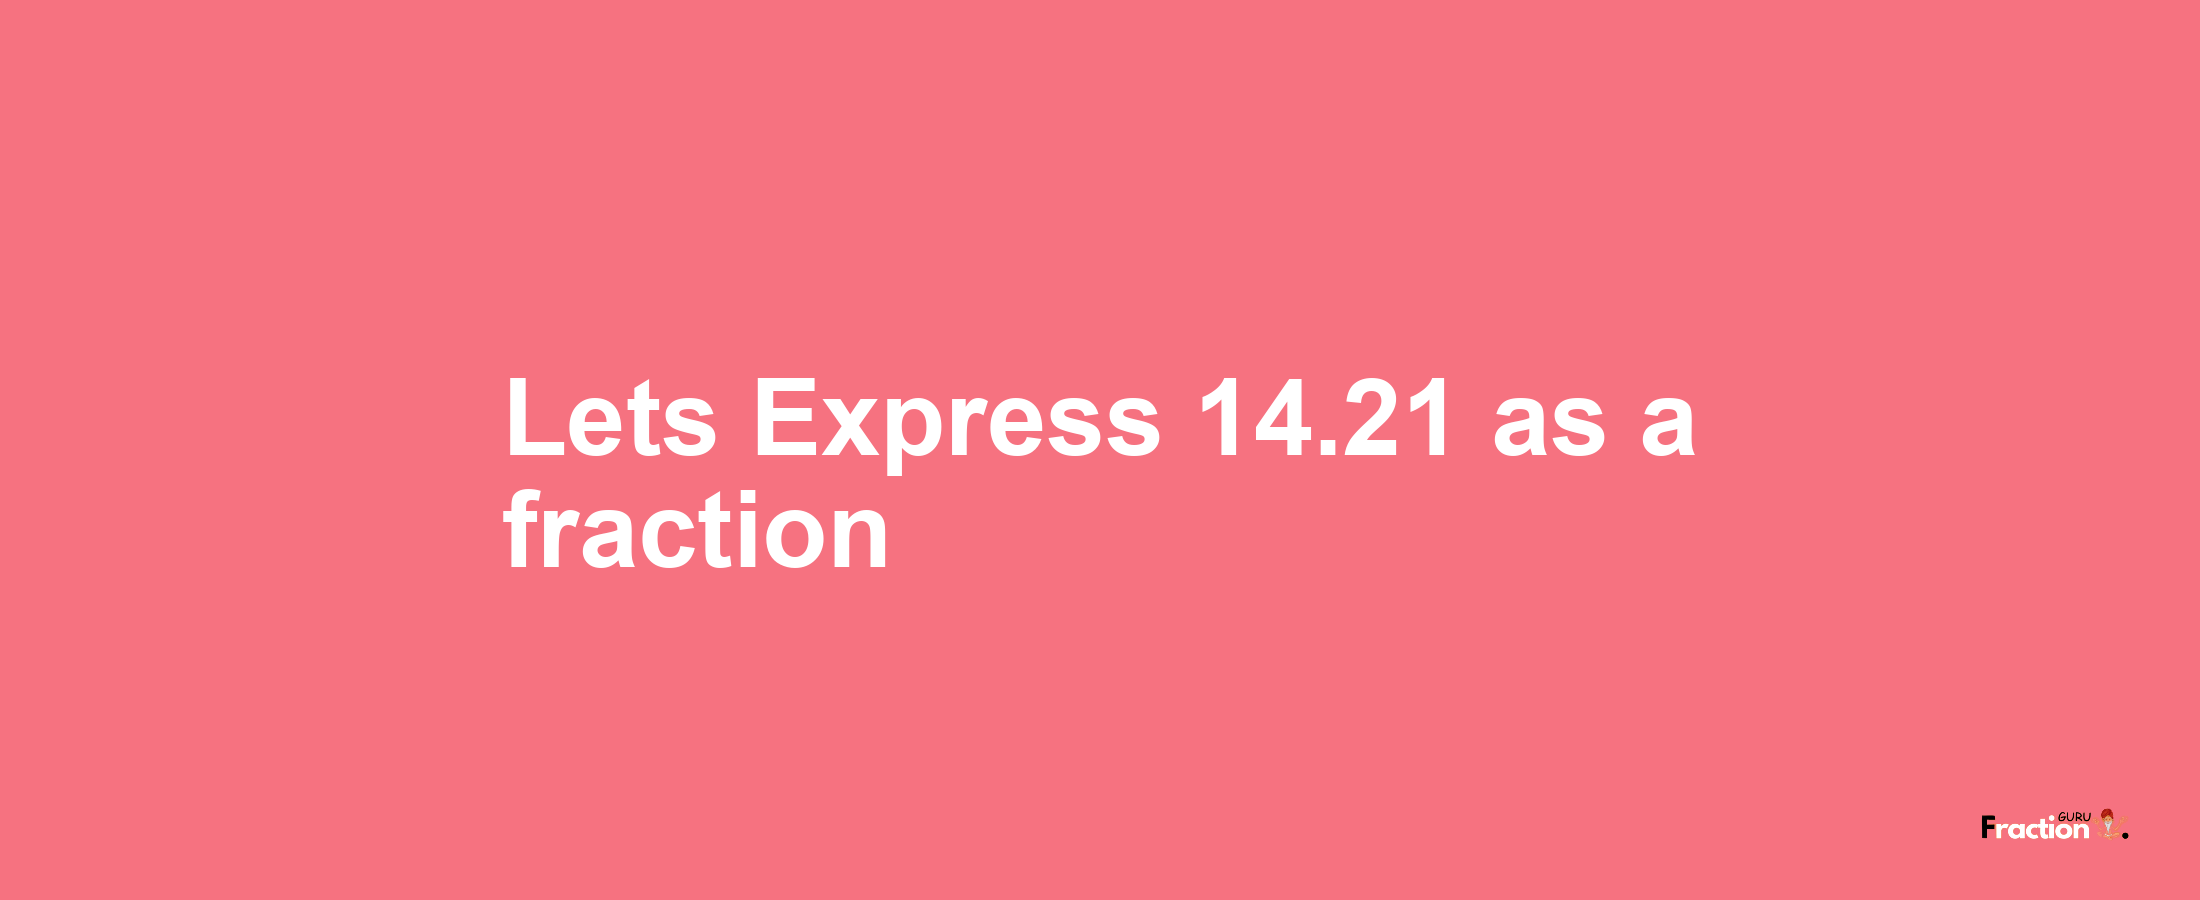 Lets Express 14.21 as afraction